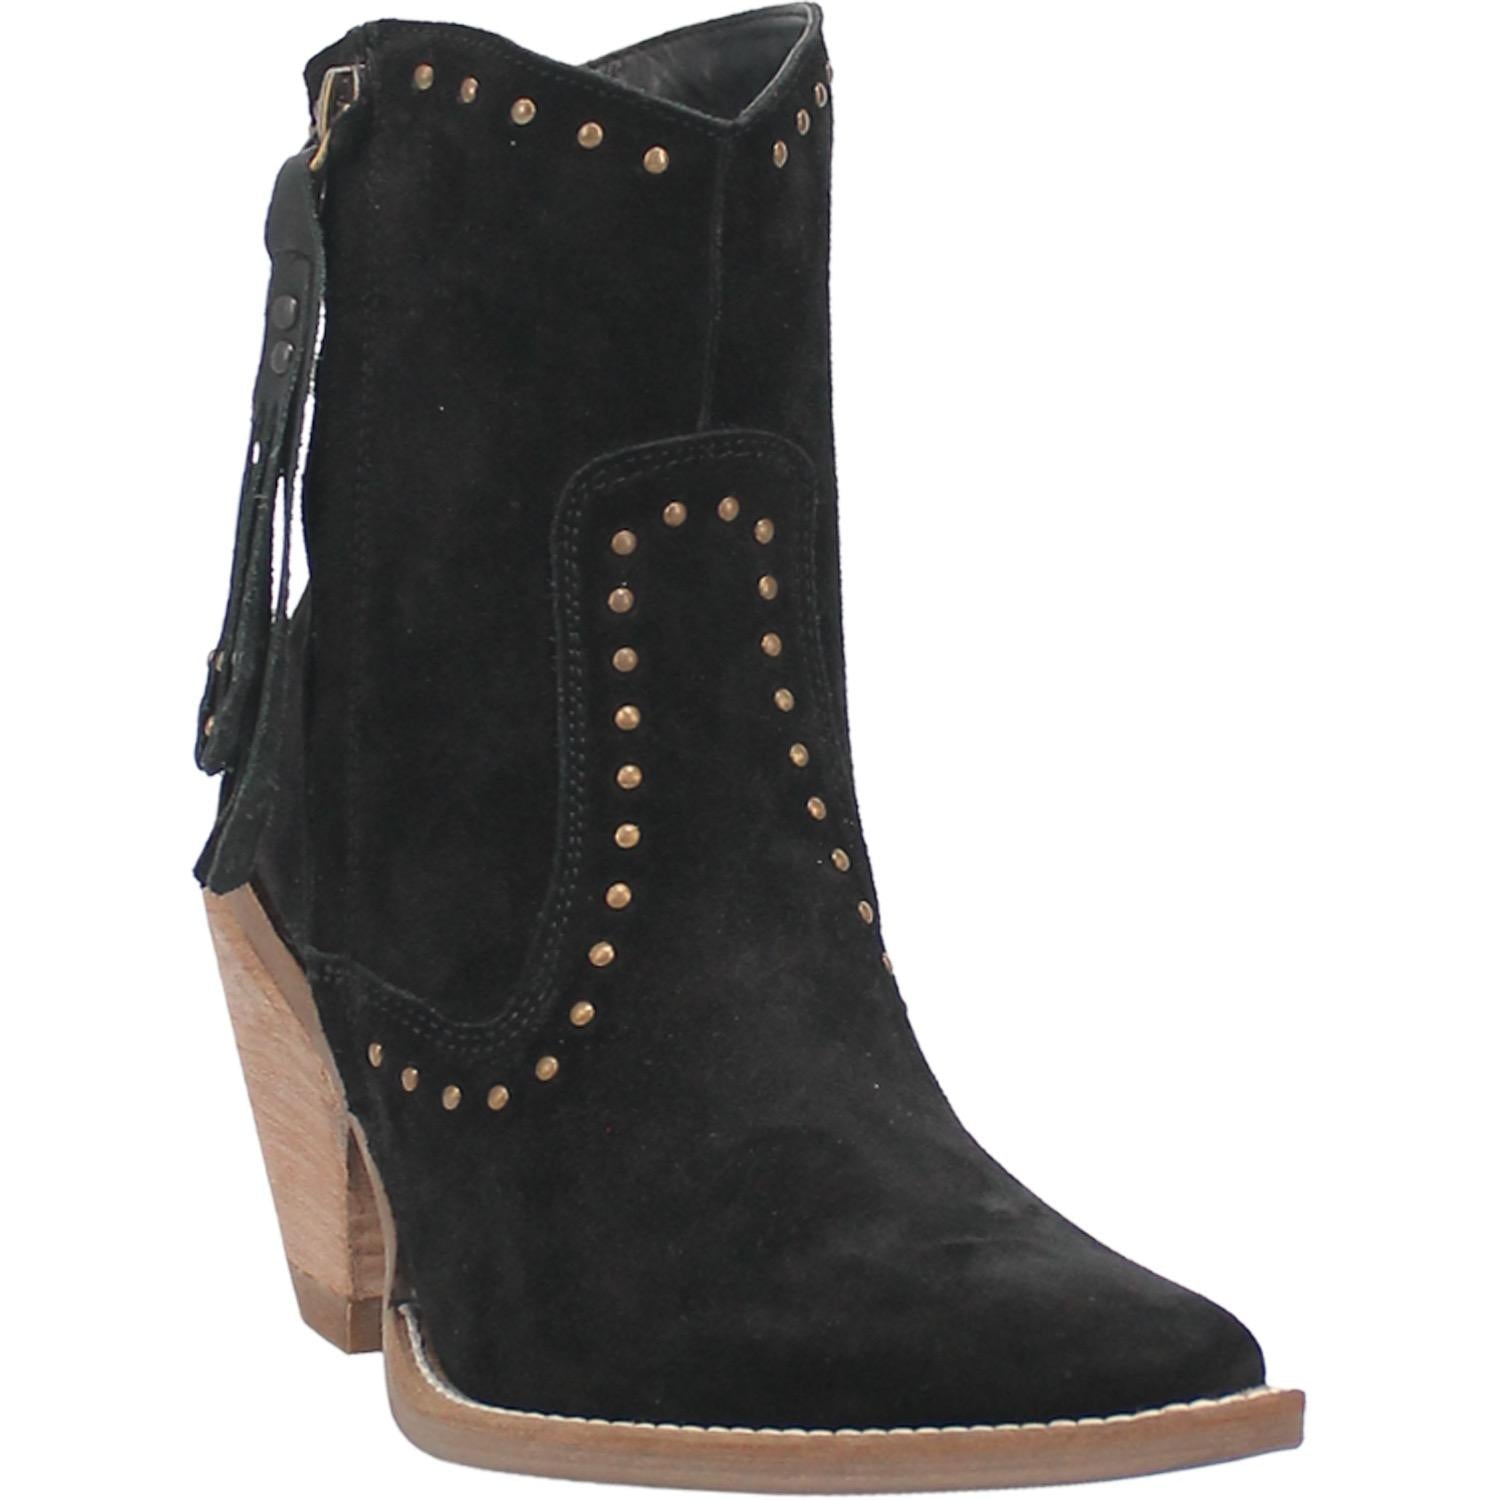 The boots shown are a low calf height bootie with a snip pointed toe made of genuine leather. The stud design and detail adds an additional edge to any outfit you pair them with. This pair is black suede. 